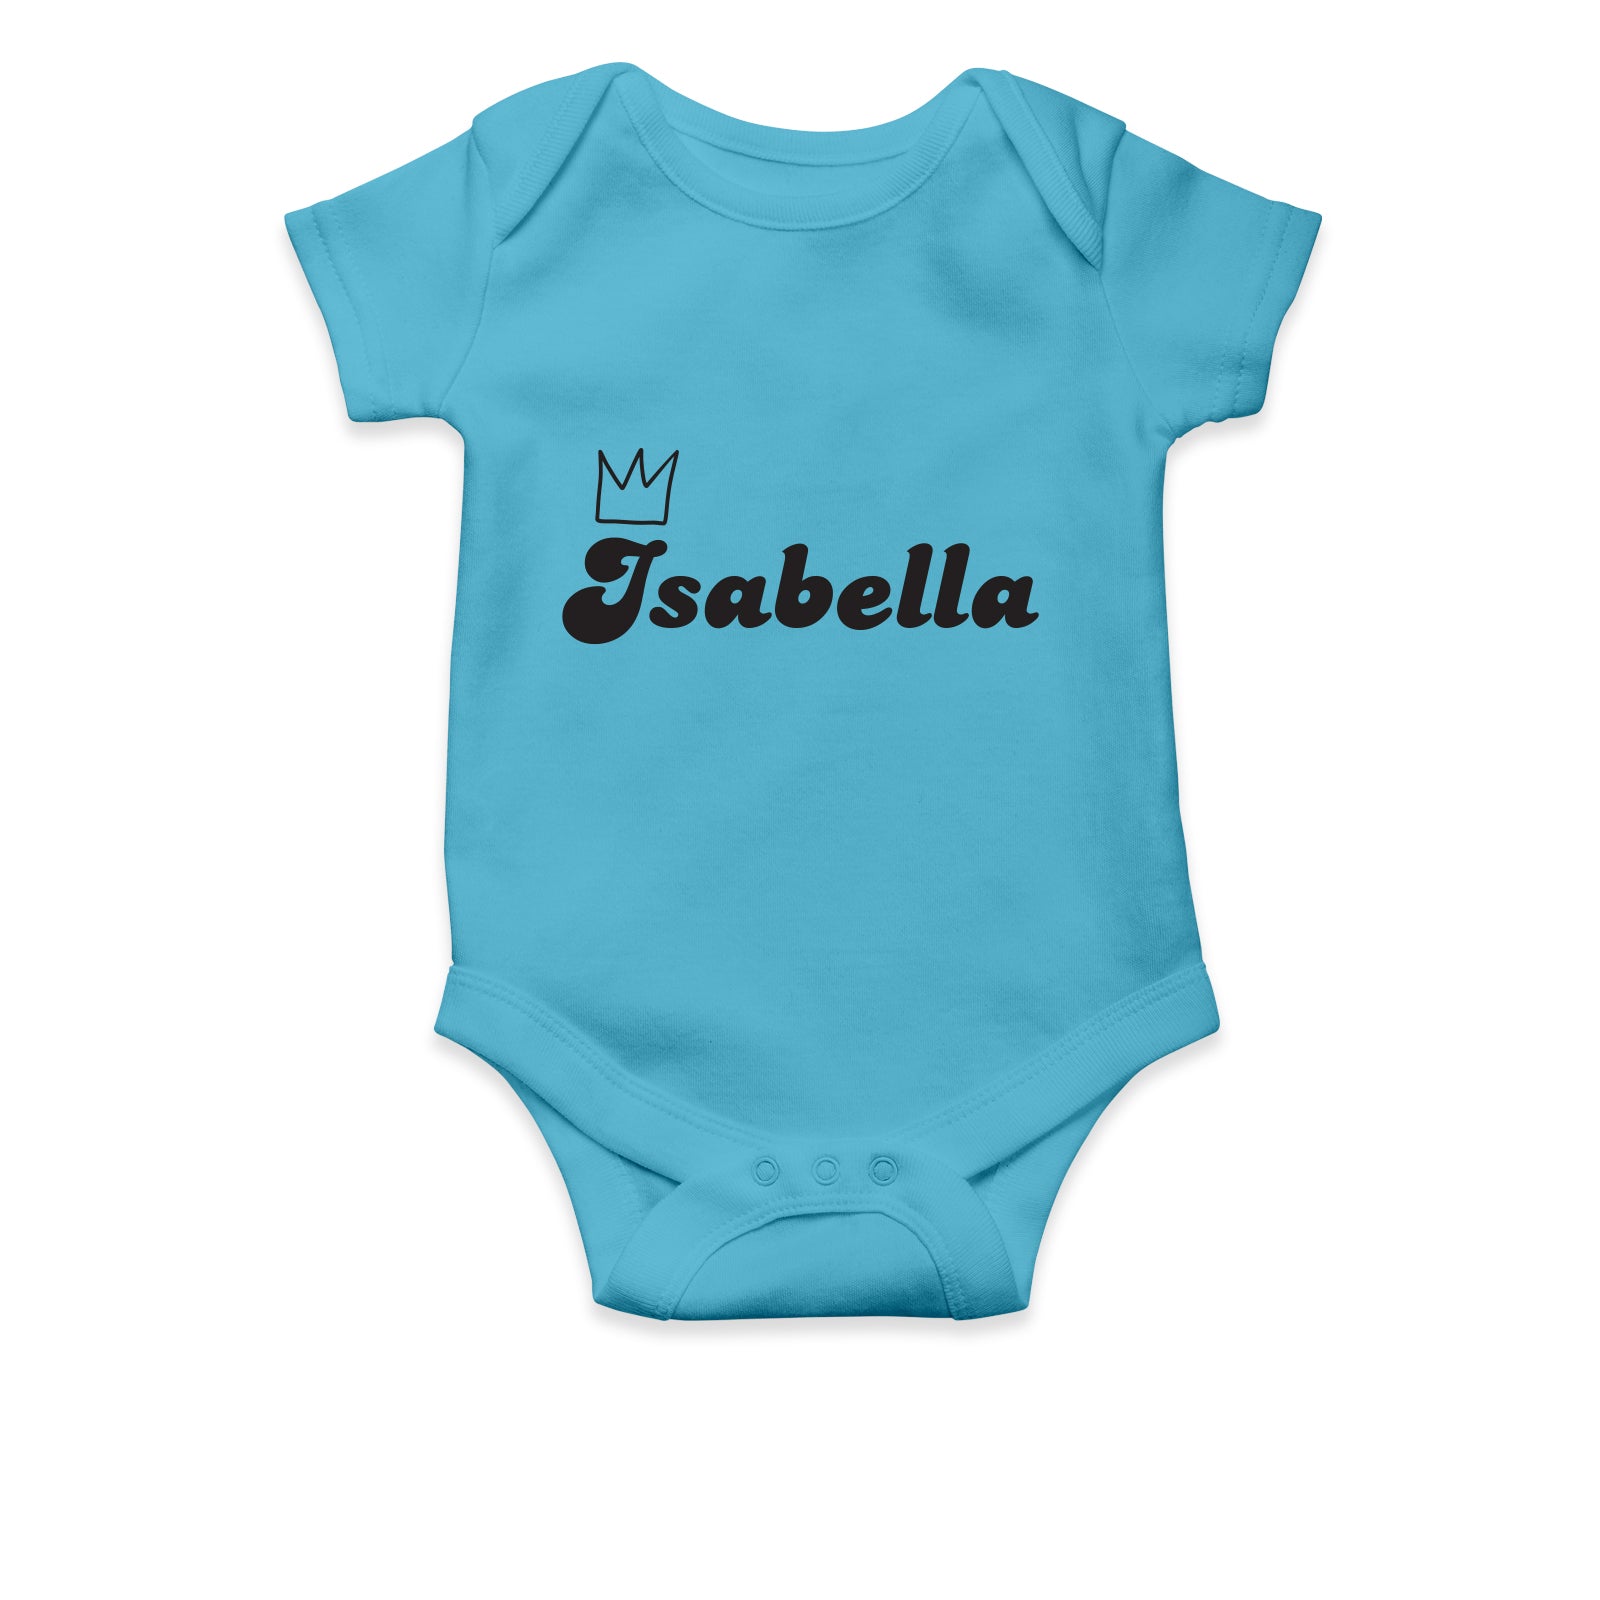 Personalised White Baby Body Suit Grow Vest - King or Queen